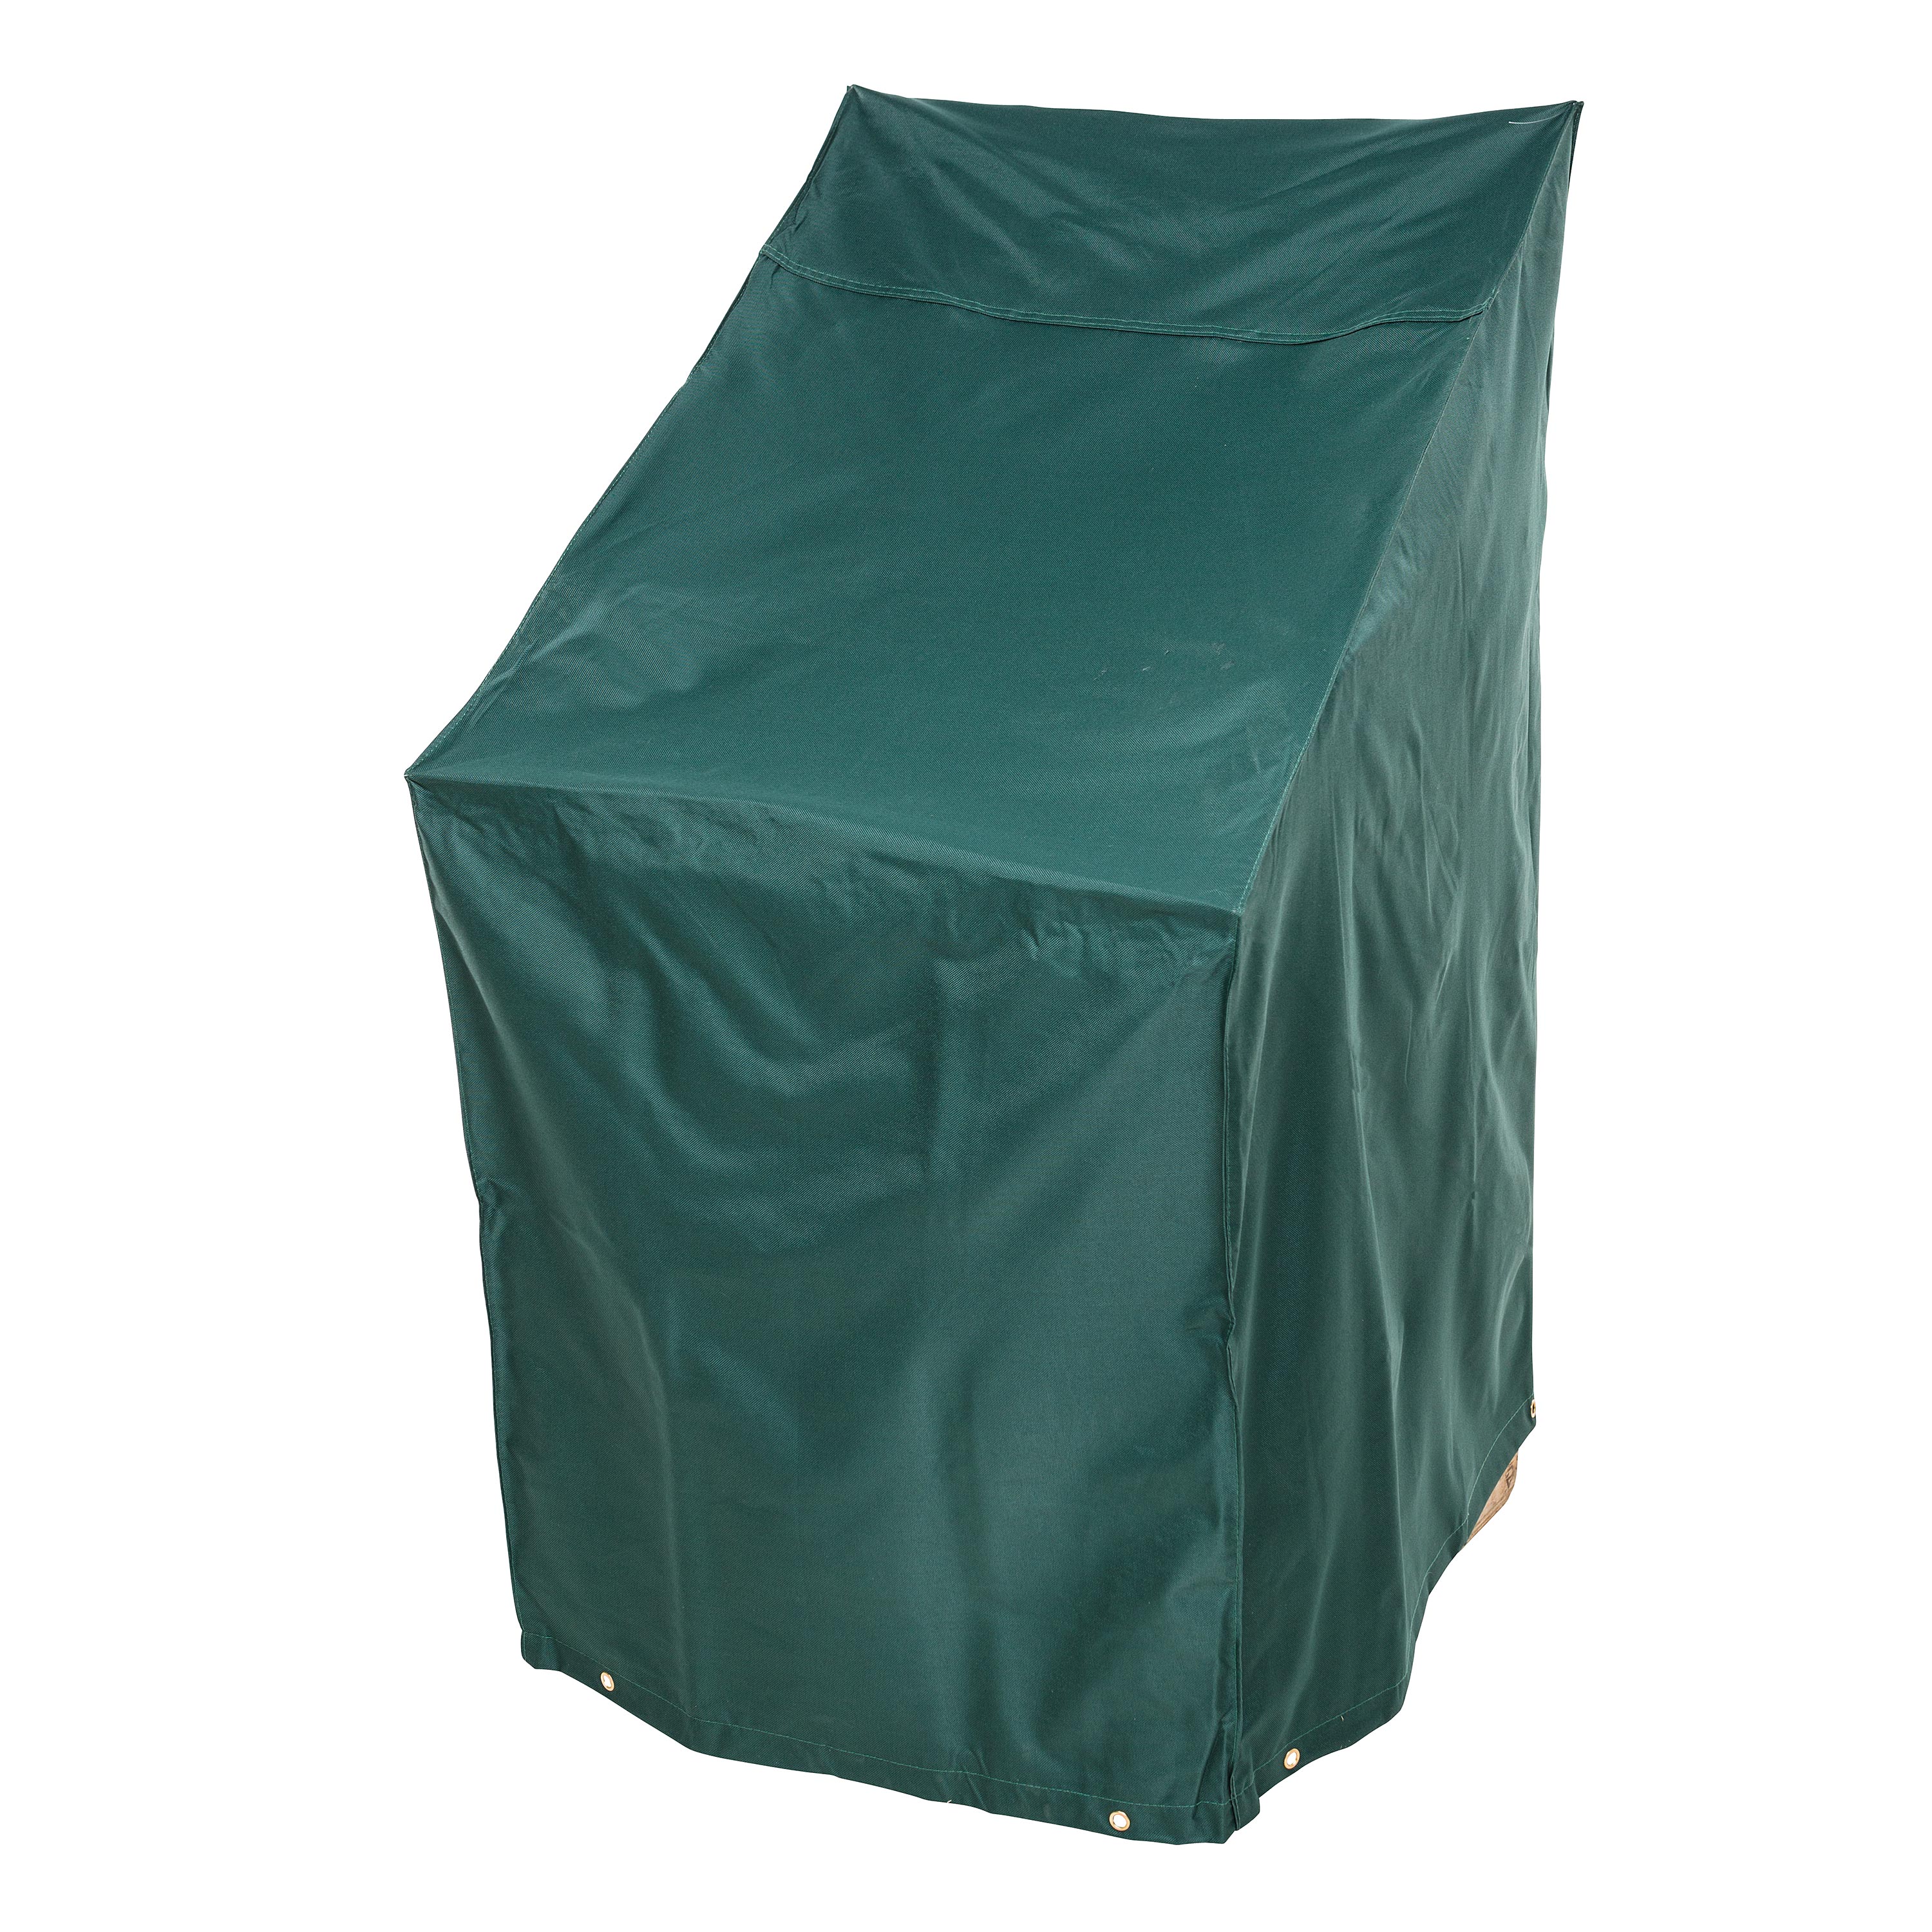 Classic Outdoor Furniture All-Weather Cover for Stacking Chairs